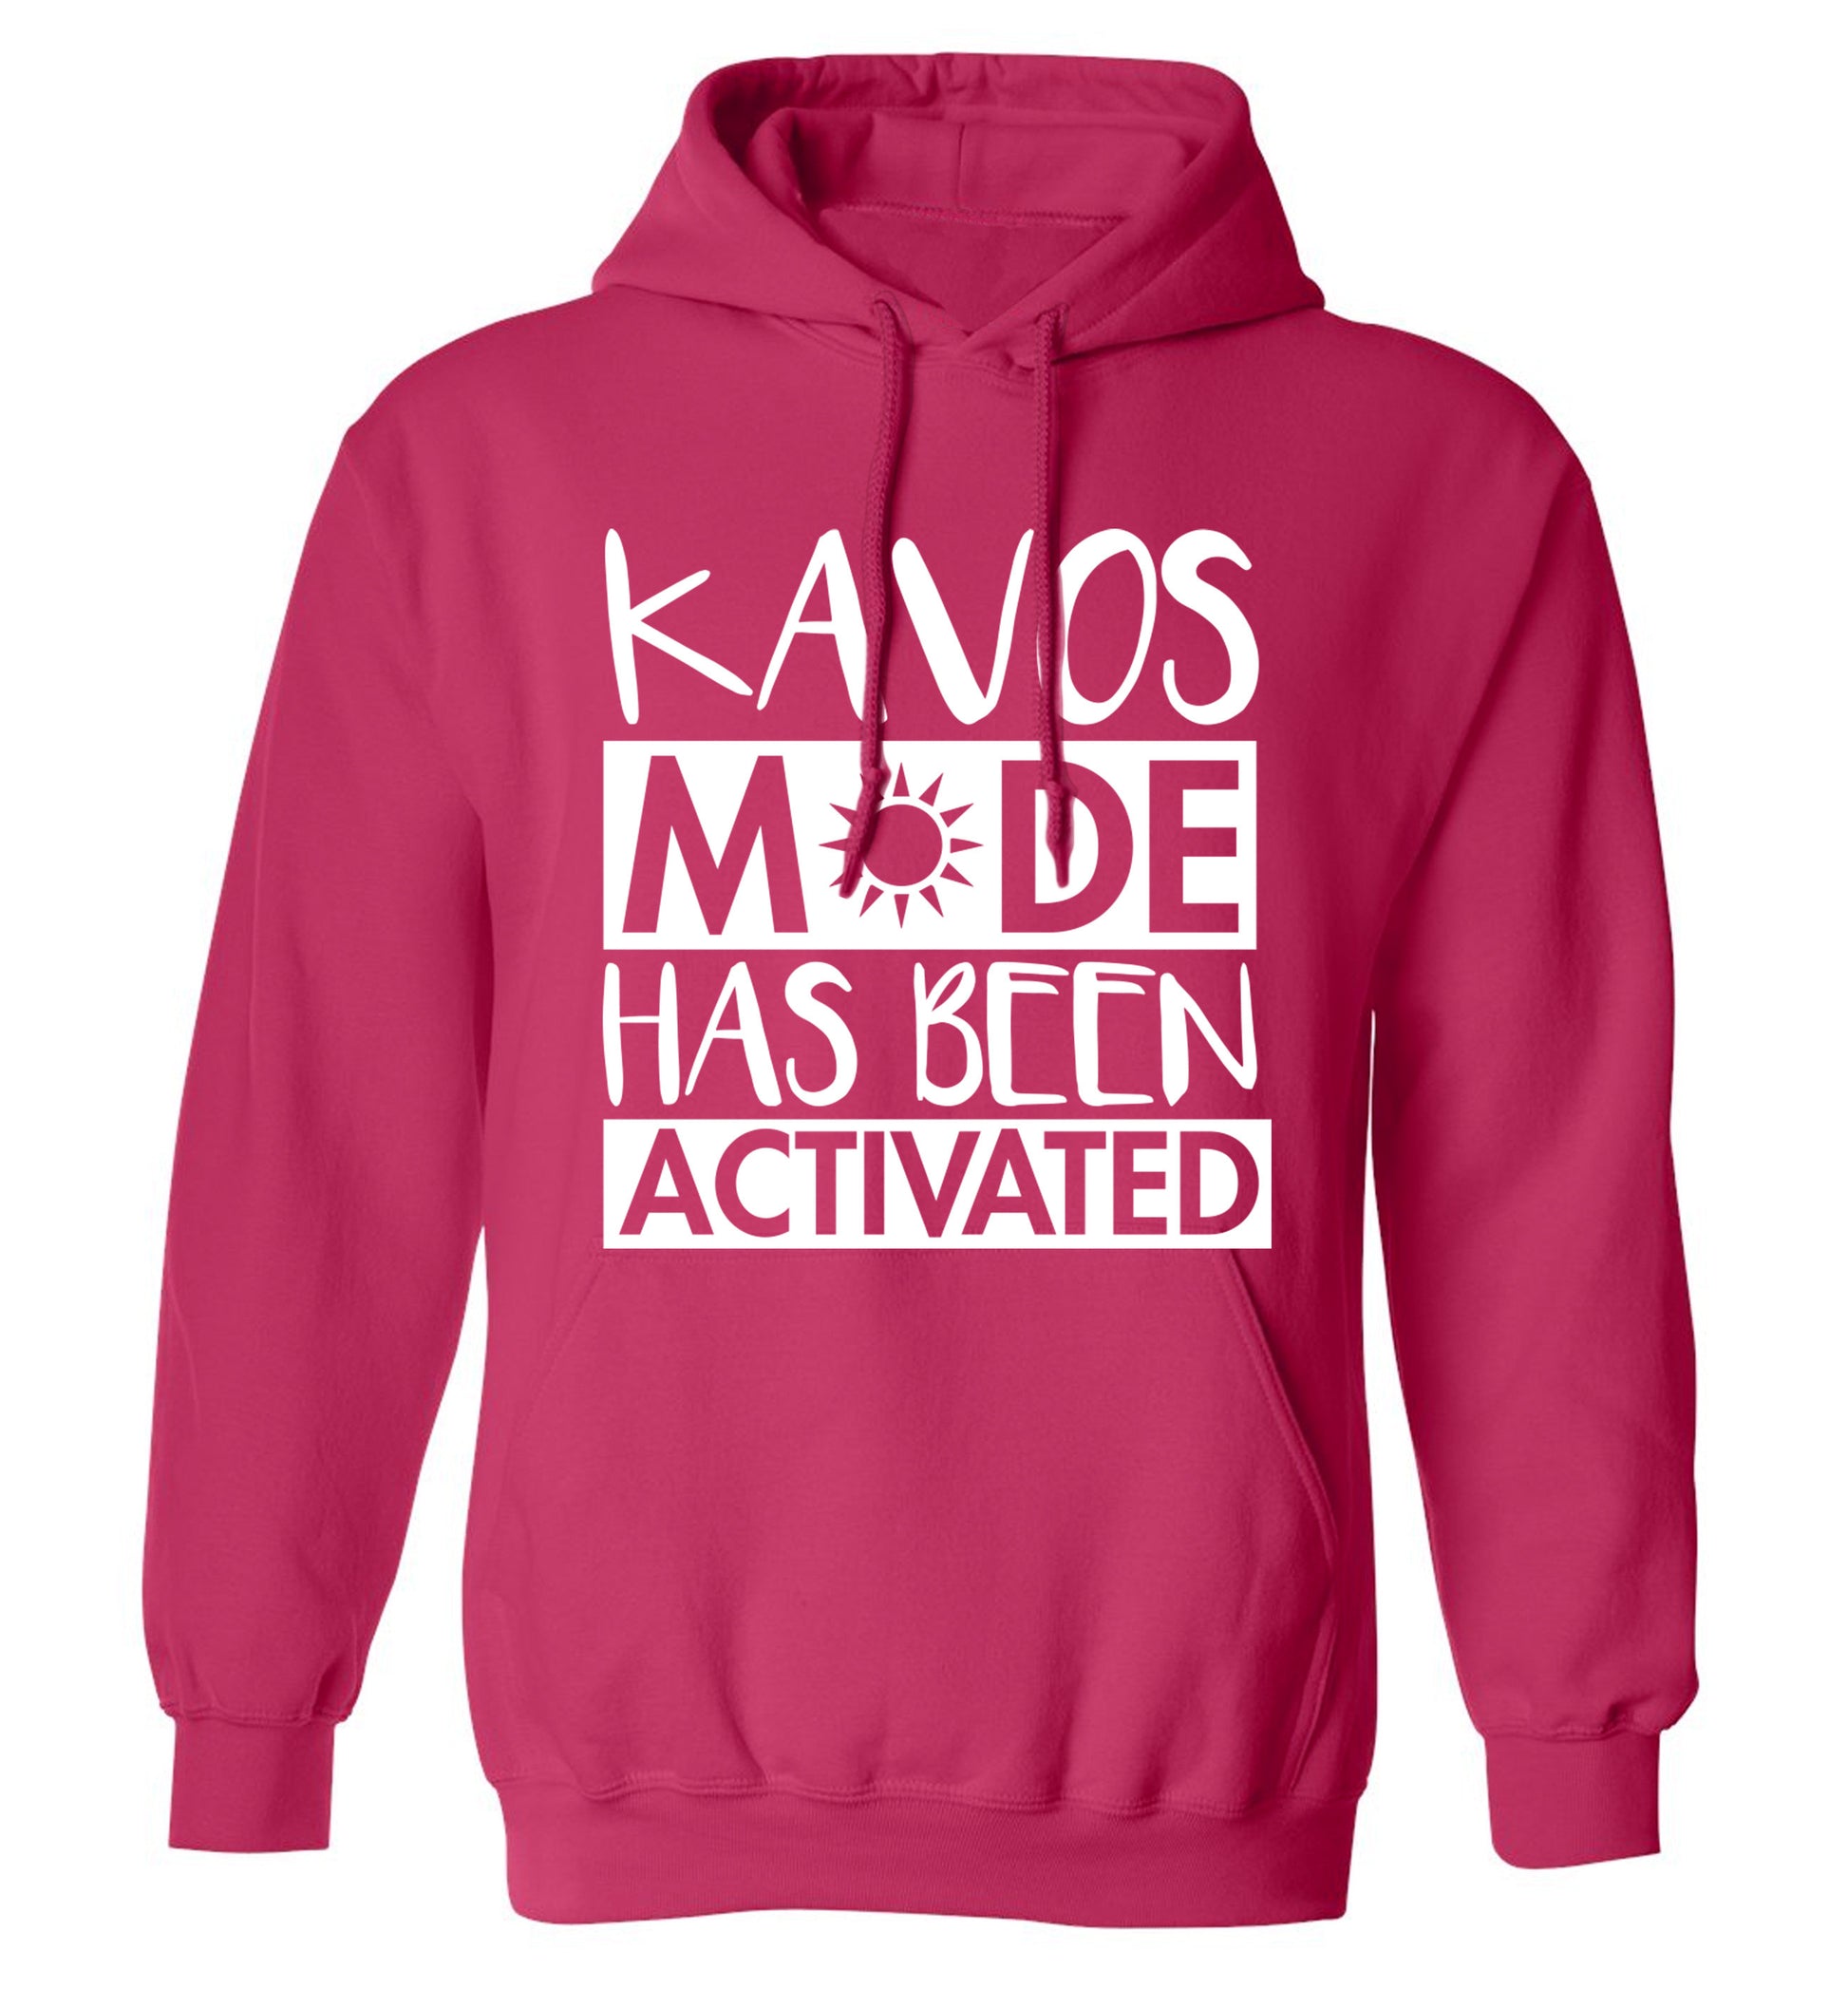 Kavos mode has been activated adults unisex pink hoodie 2XL